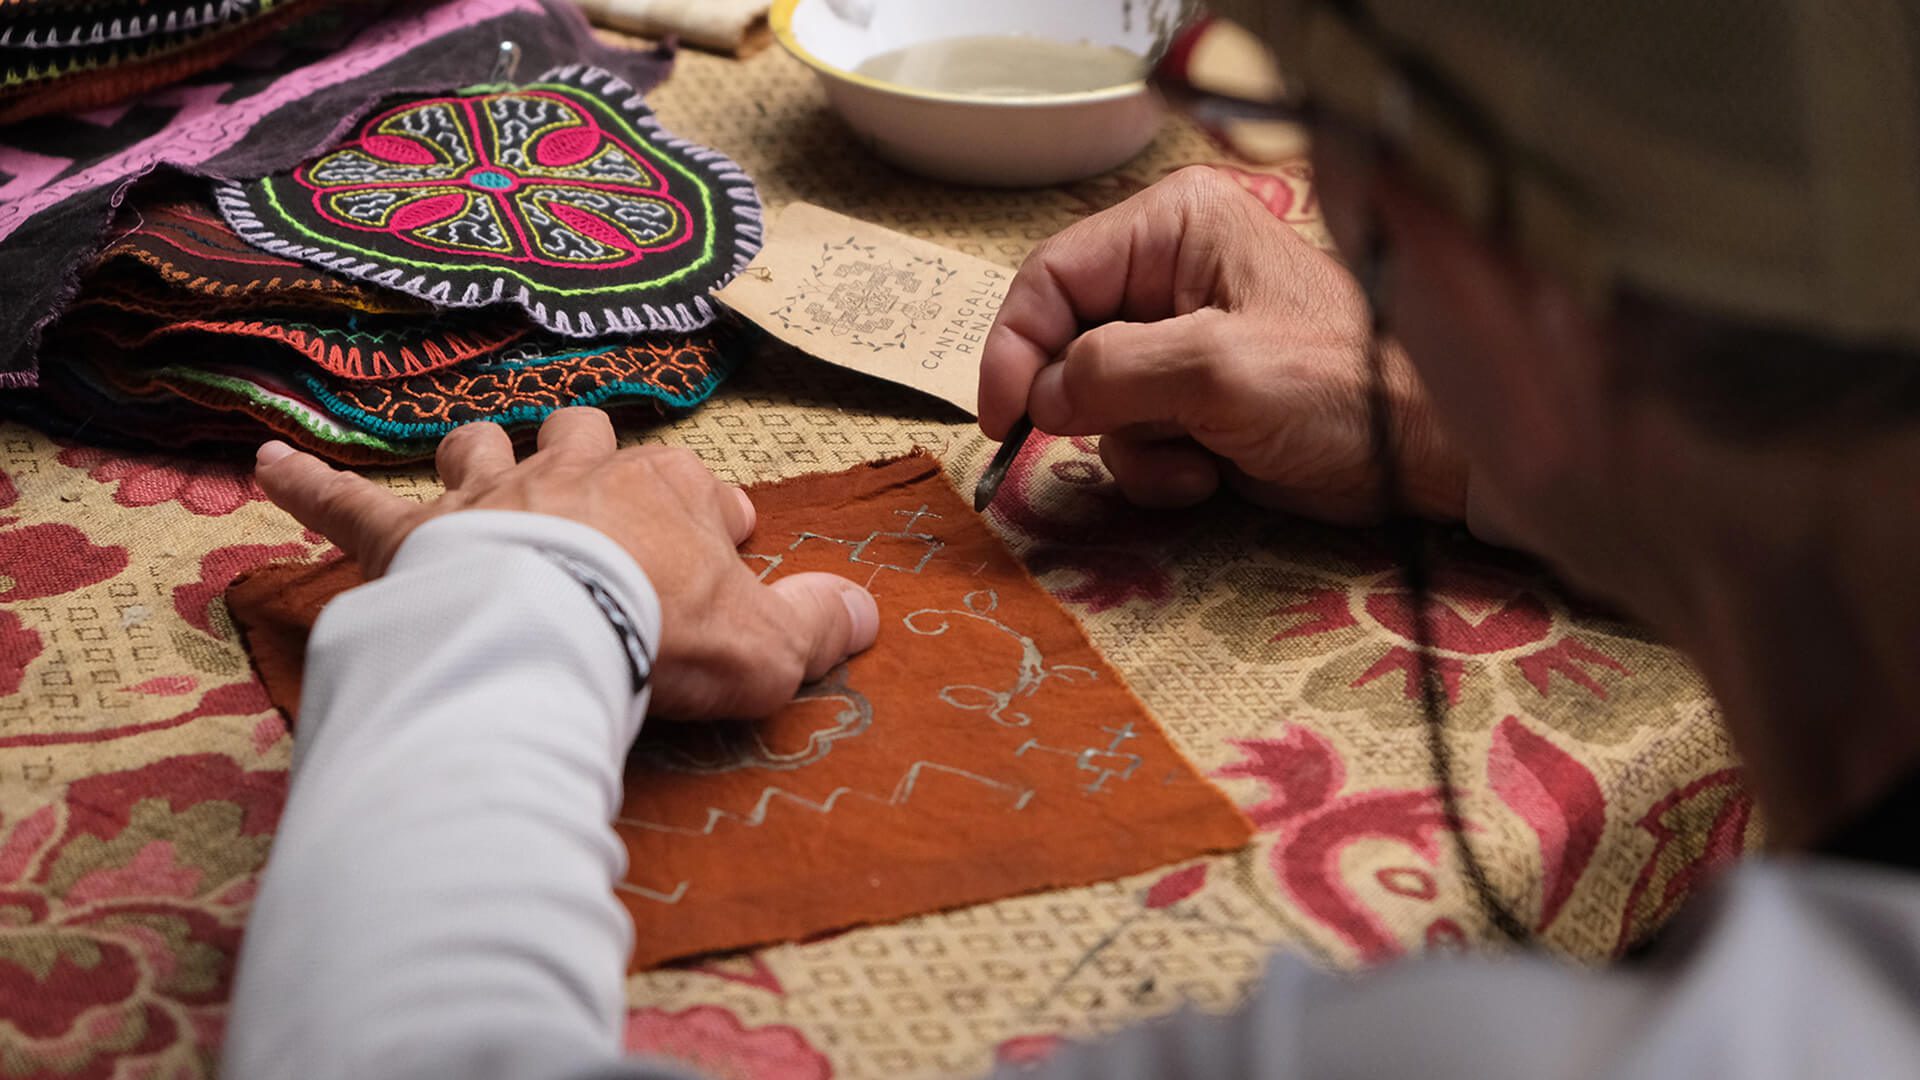 Shipibo-Konibo embroidery is well know in Peru